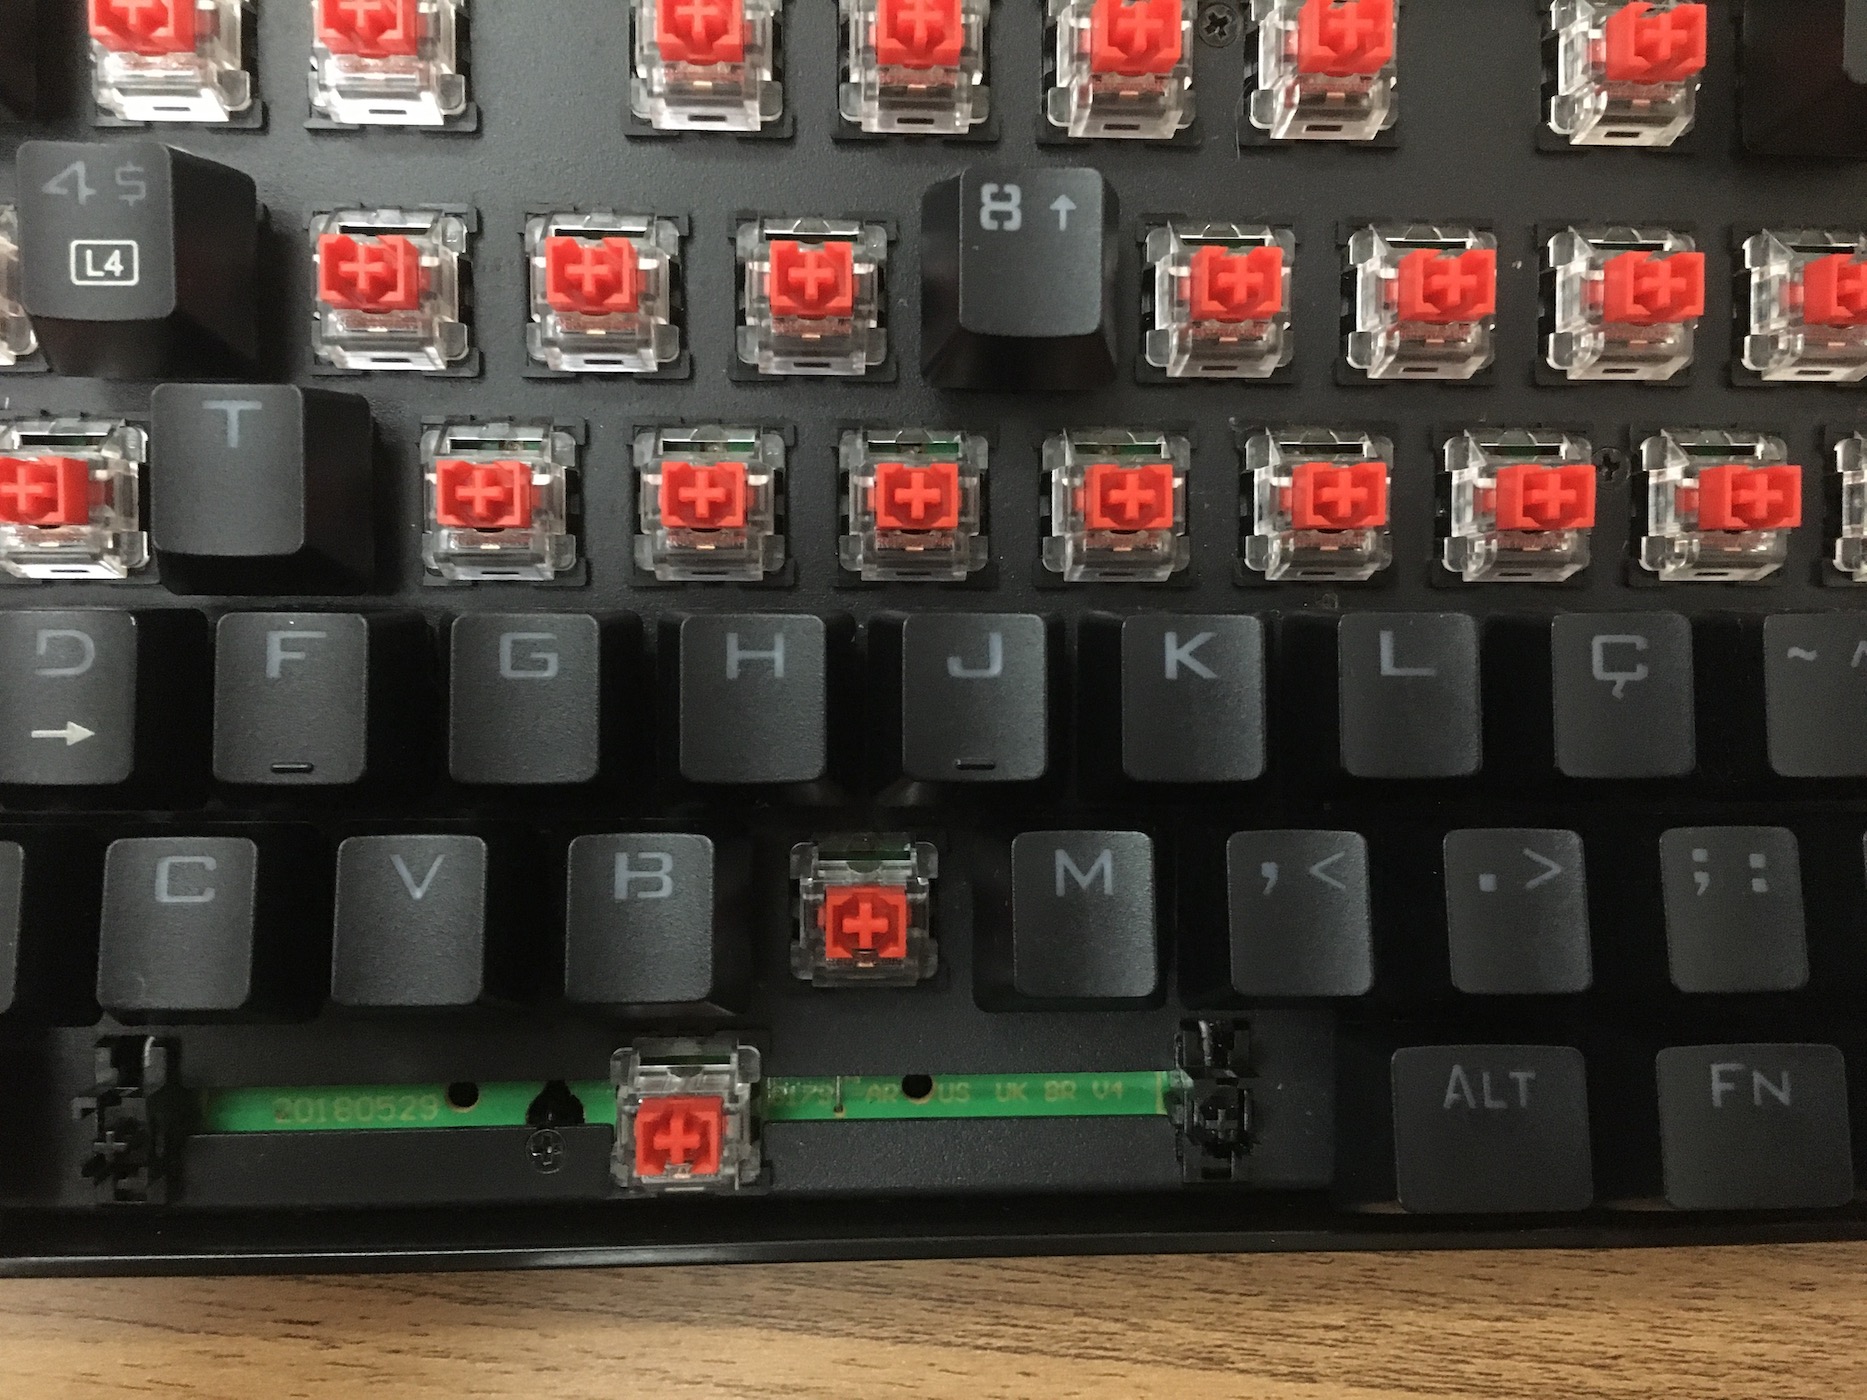 Keyboard without some keycaps